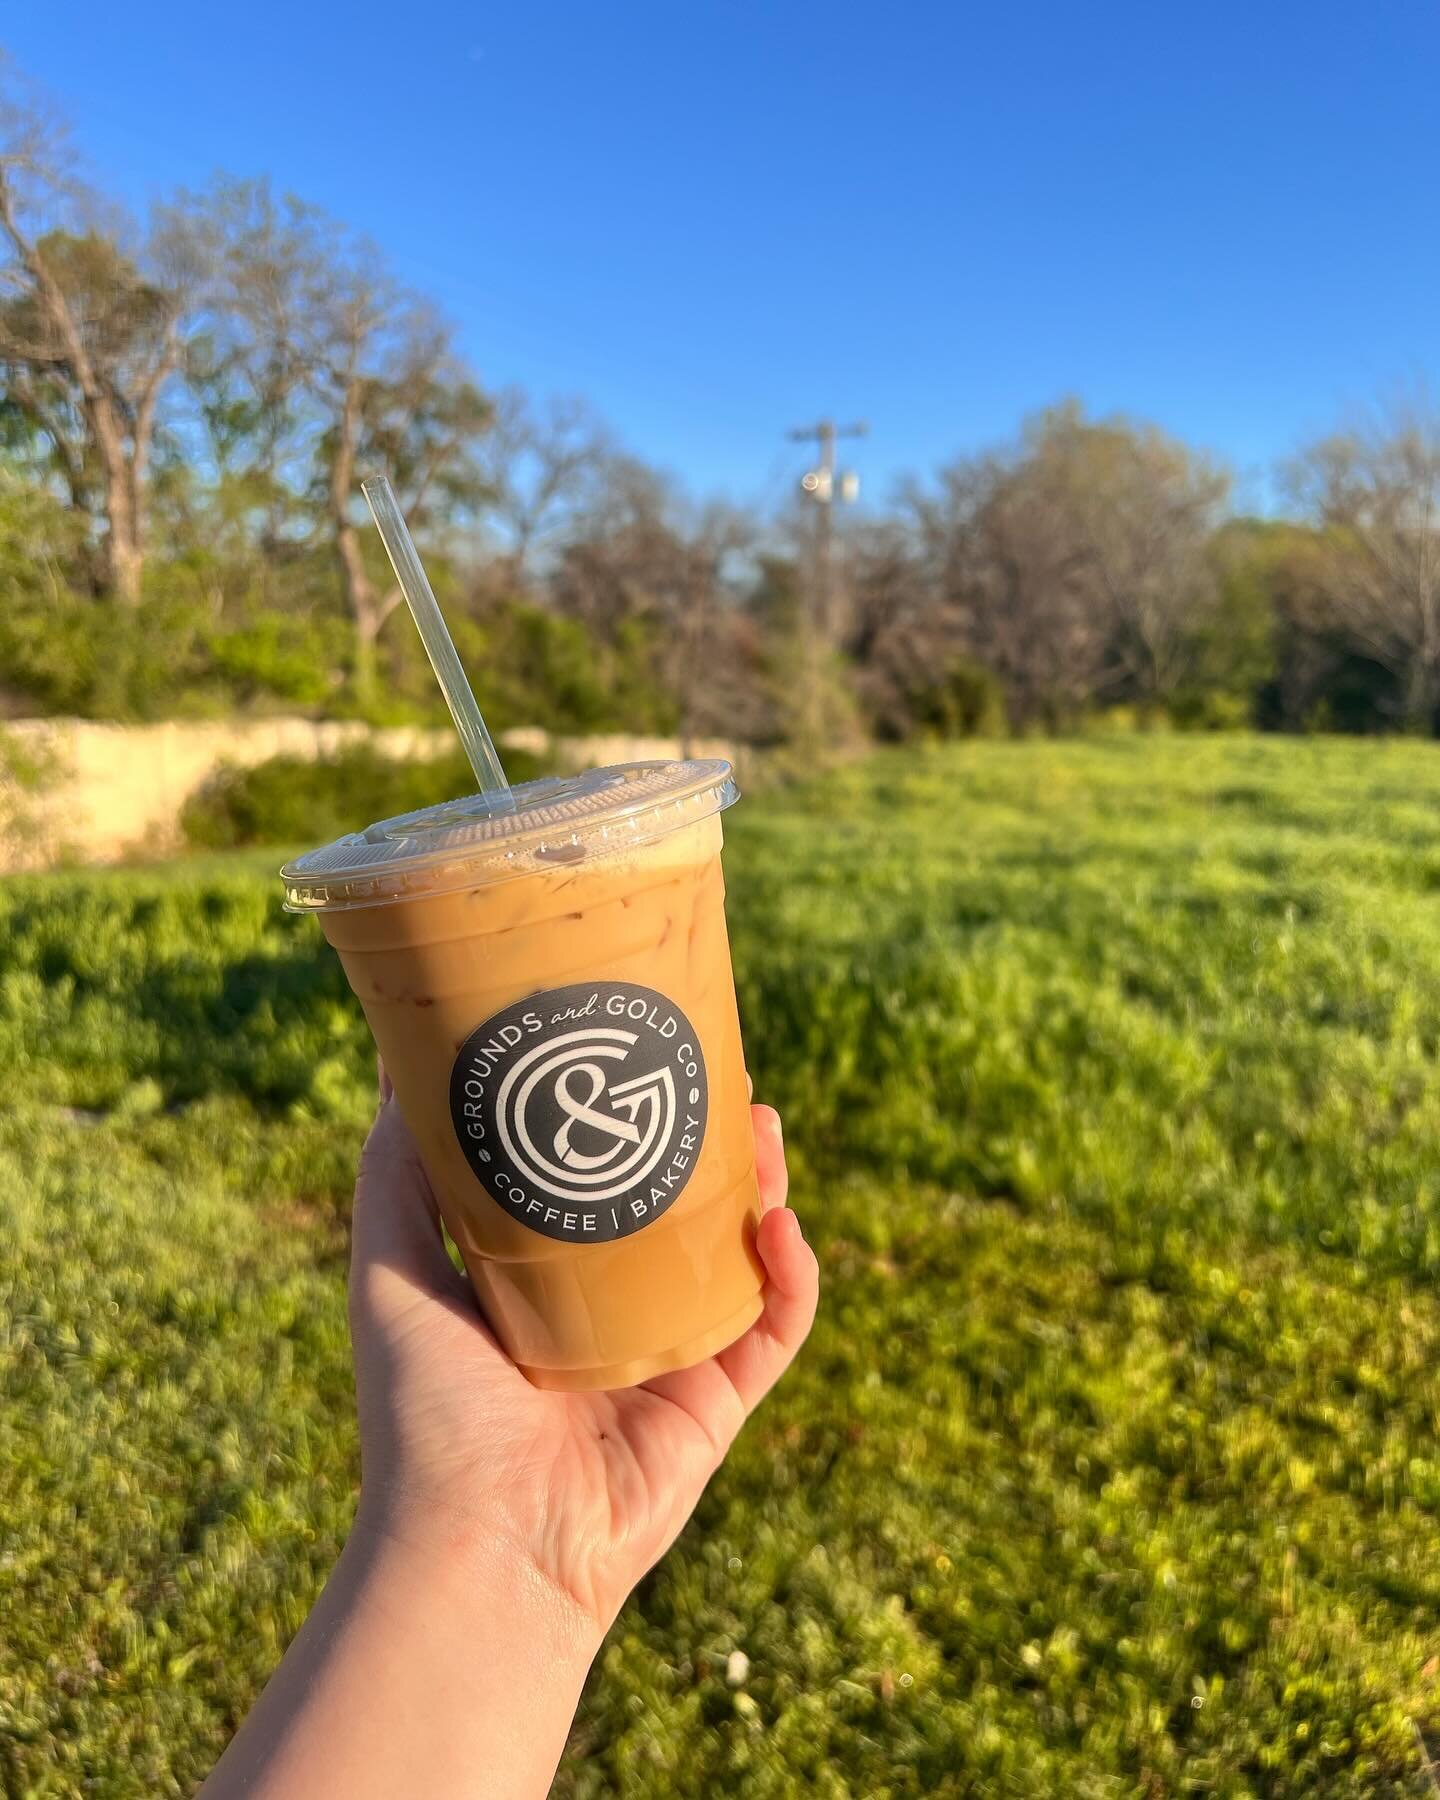 It&rsquo;s the perfect day for a Pistachio Shaken Espresso! Come in and try one today 😋

#spring #coffee #groundsandgoldcoffee #latte #barista #arlingtoncoffeeshop #txcoffee #dwg #specials #localcoffee #texascoffee #coffeeshop #dallastexas #fortwort